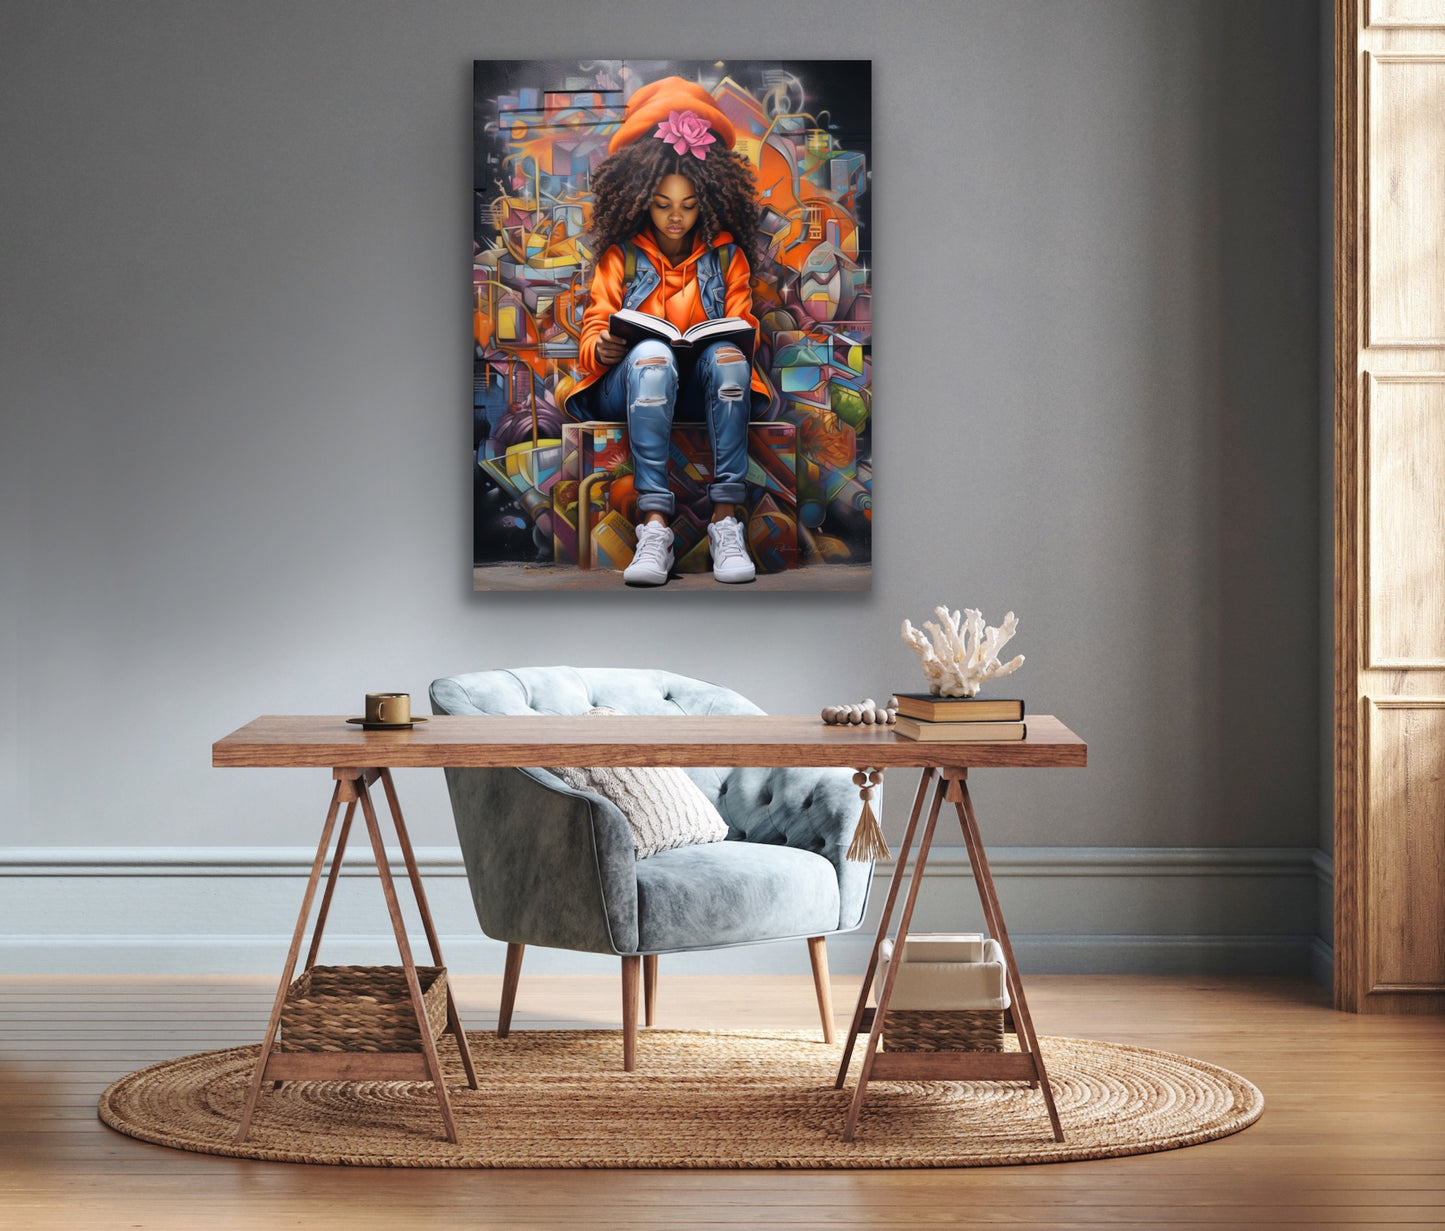 My Quiet Place | Reading Art | Stretched Canvas Print Wall Art | Black Art | African American Art